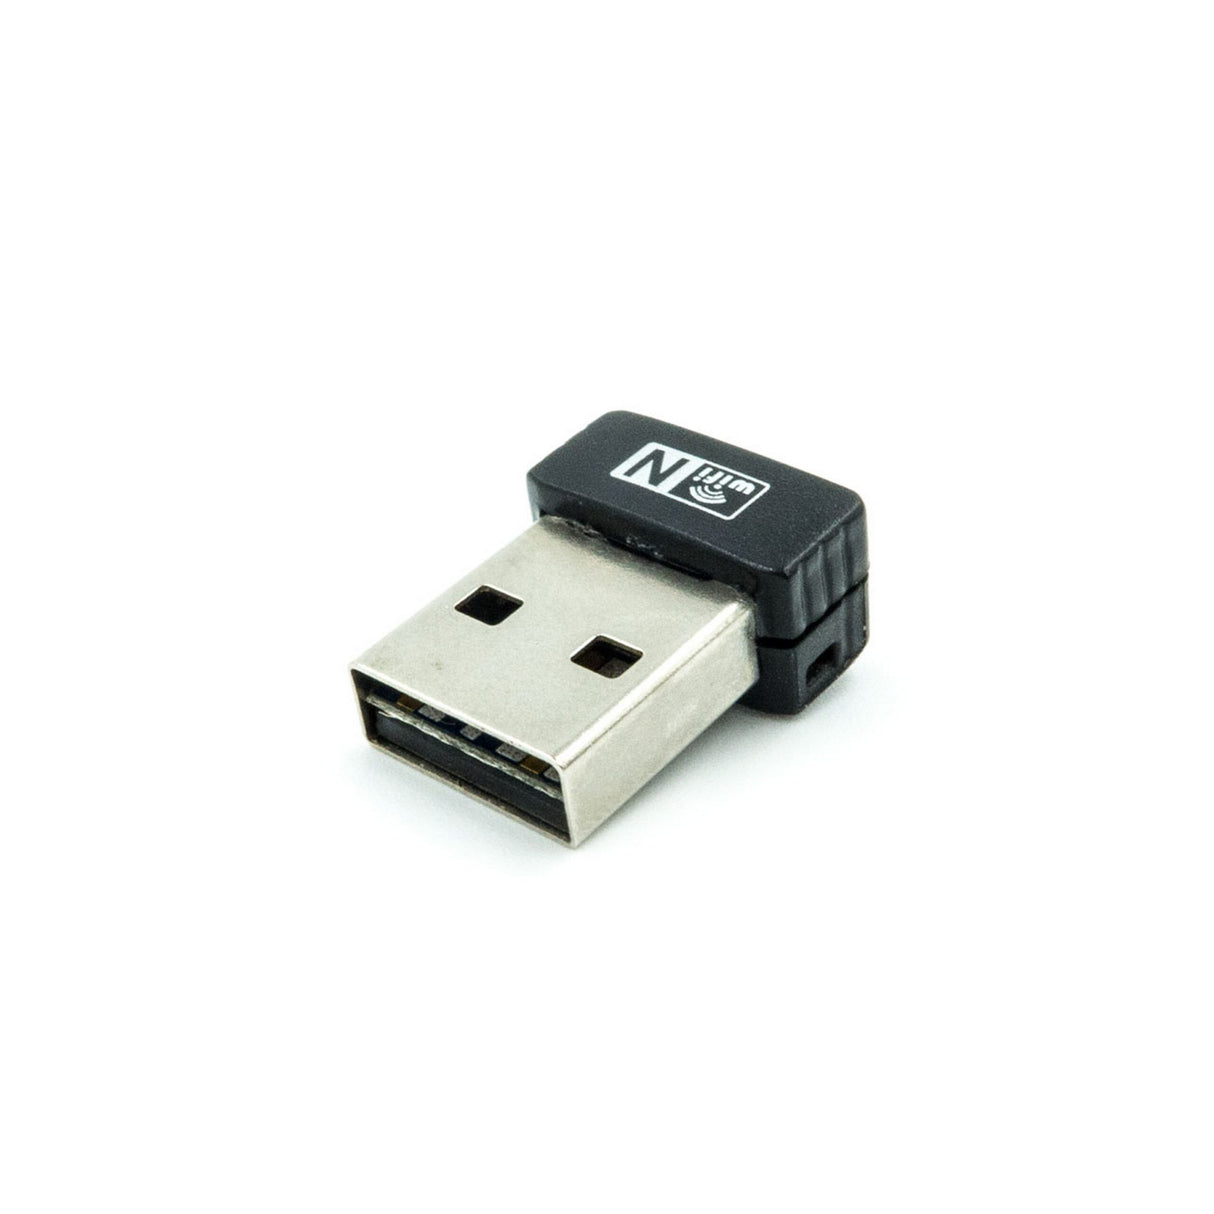 QSC CP-000033-00 Wi-Fi Dongle USB Adapter for TouchMix Series, Single Unit